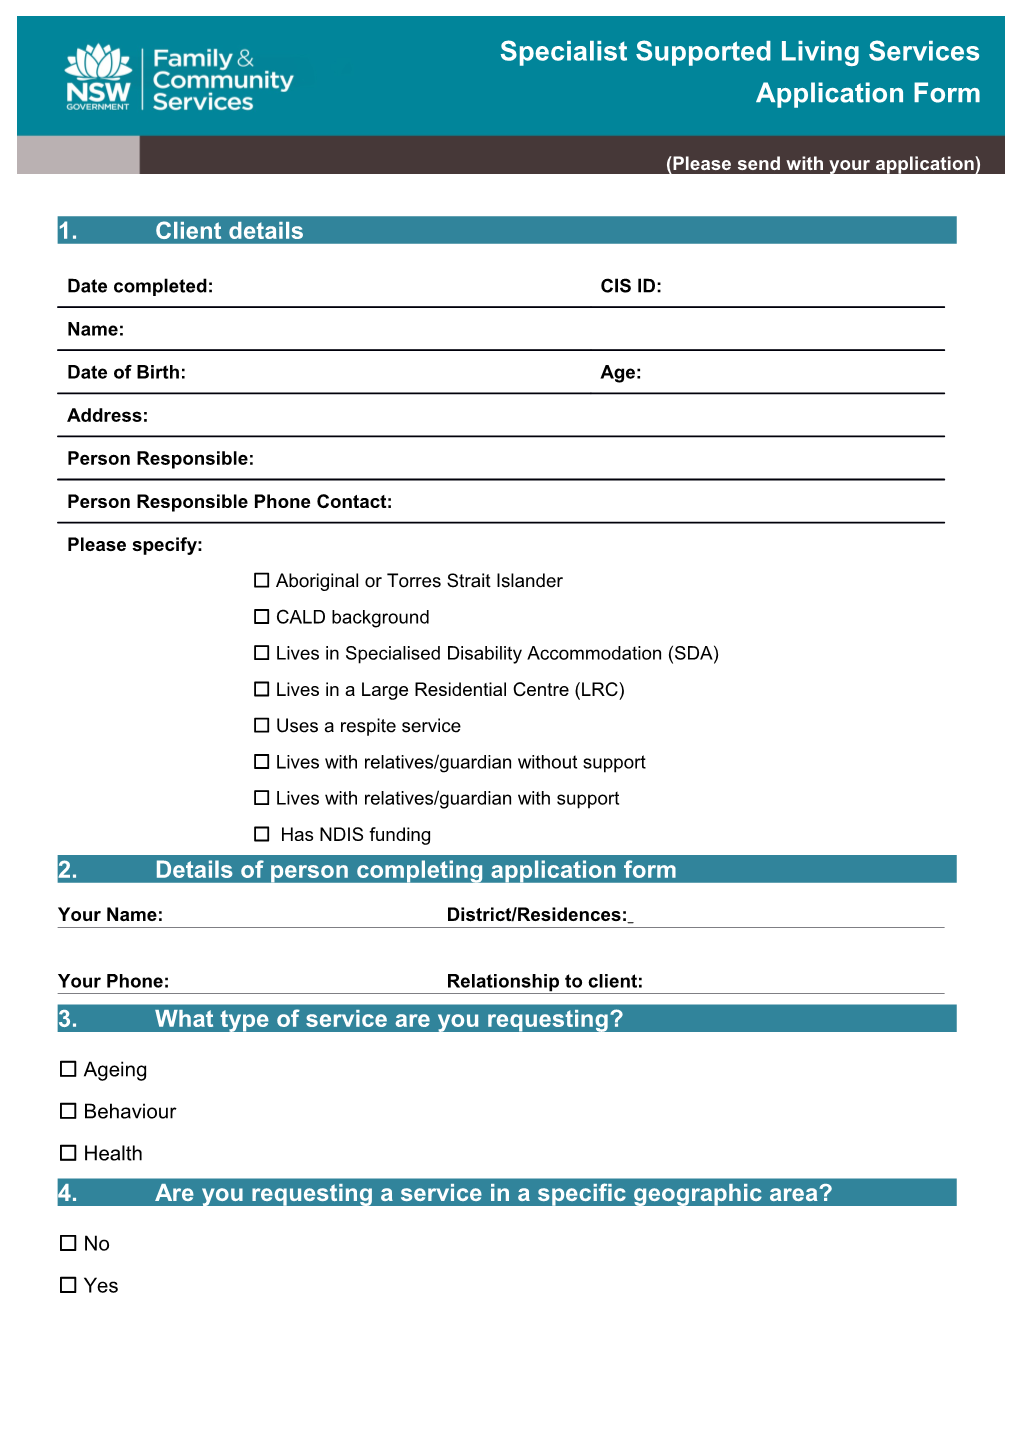 2. Details of Person Completing Application Form